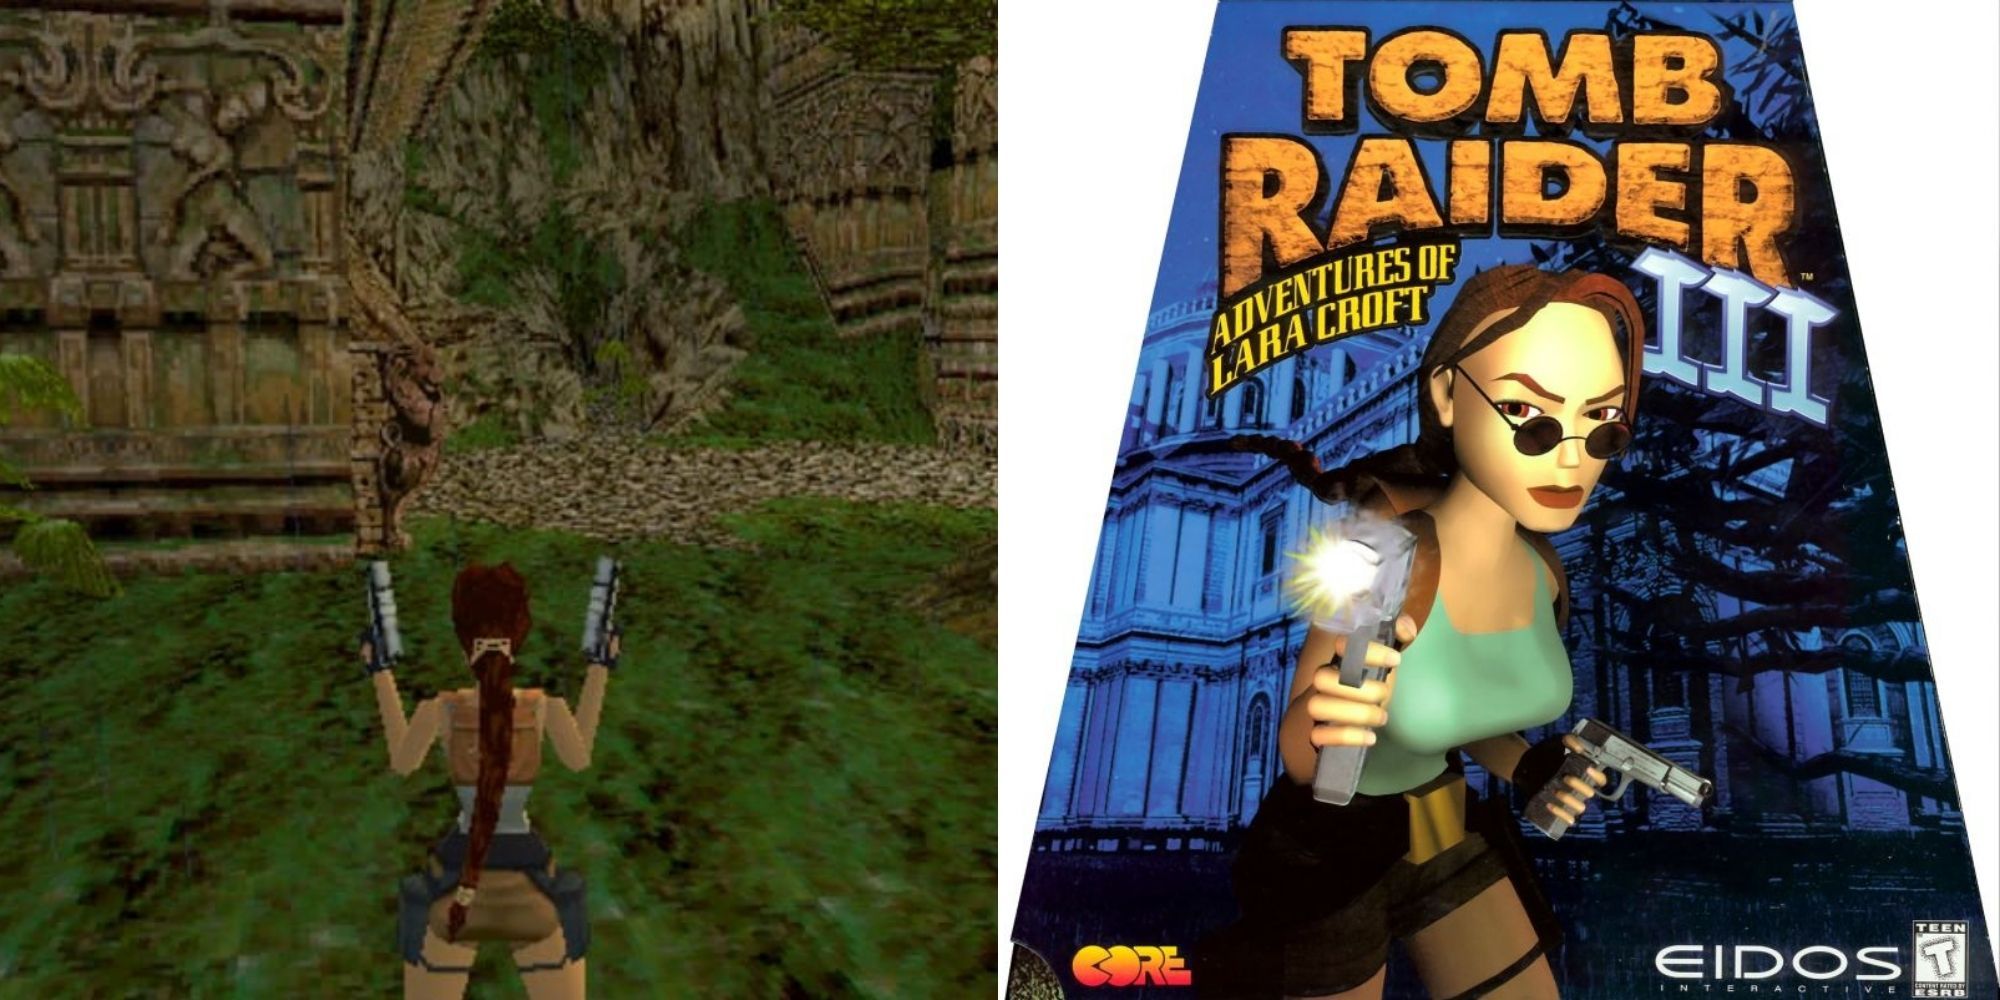 Lara Croft exploring some ruins and the cover art for Tomb Raider III